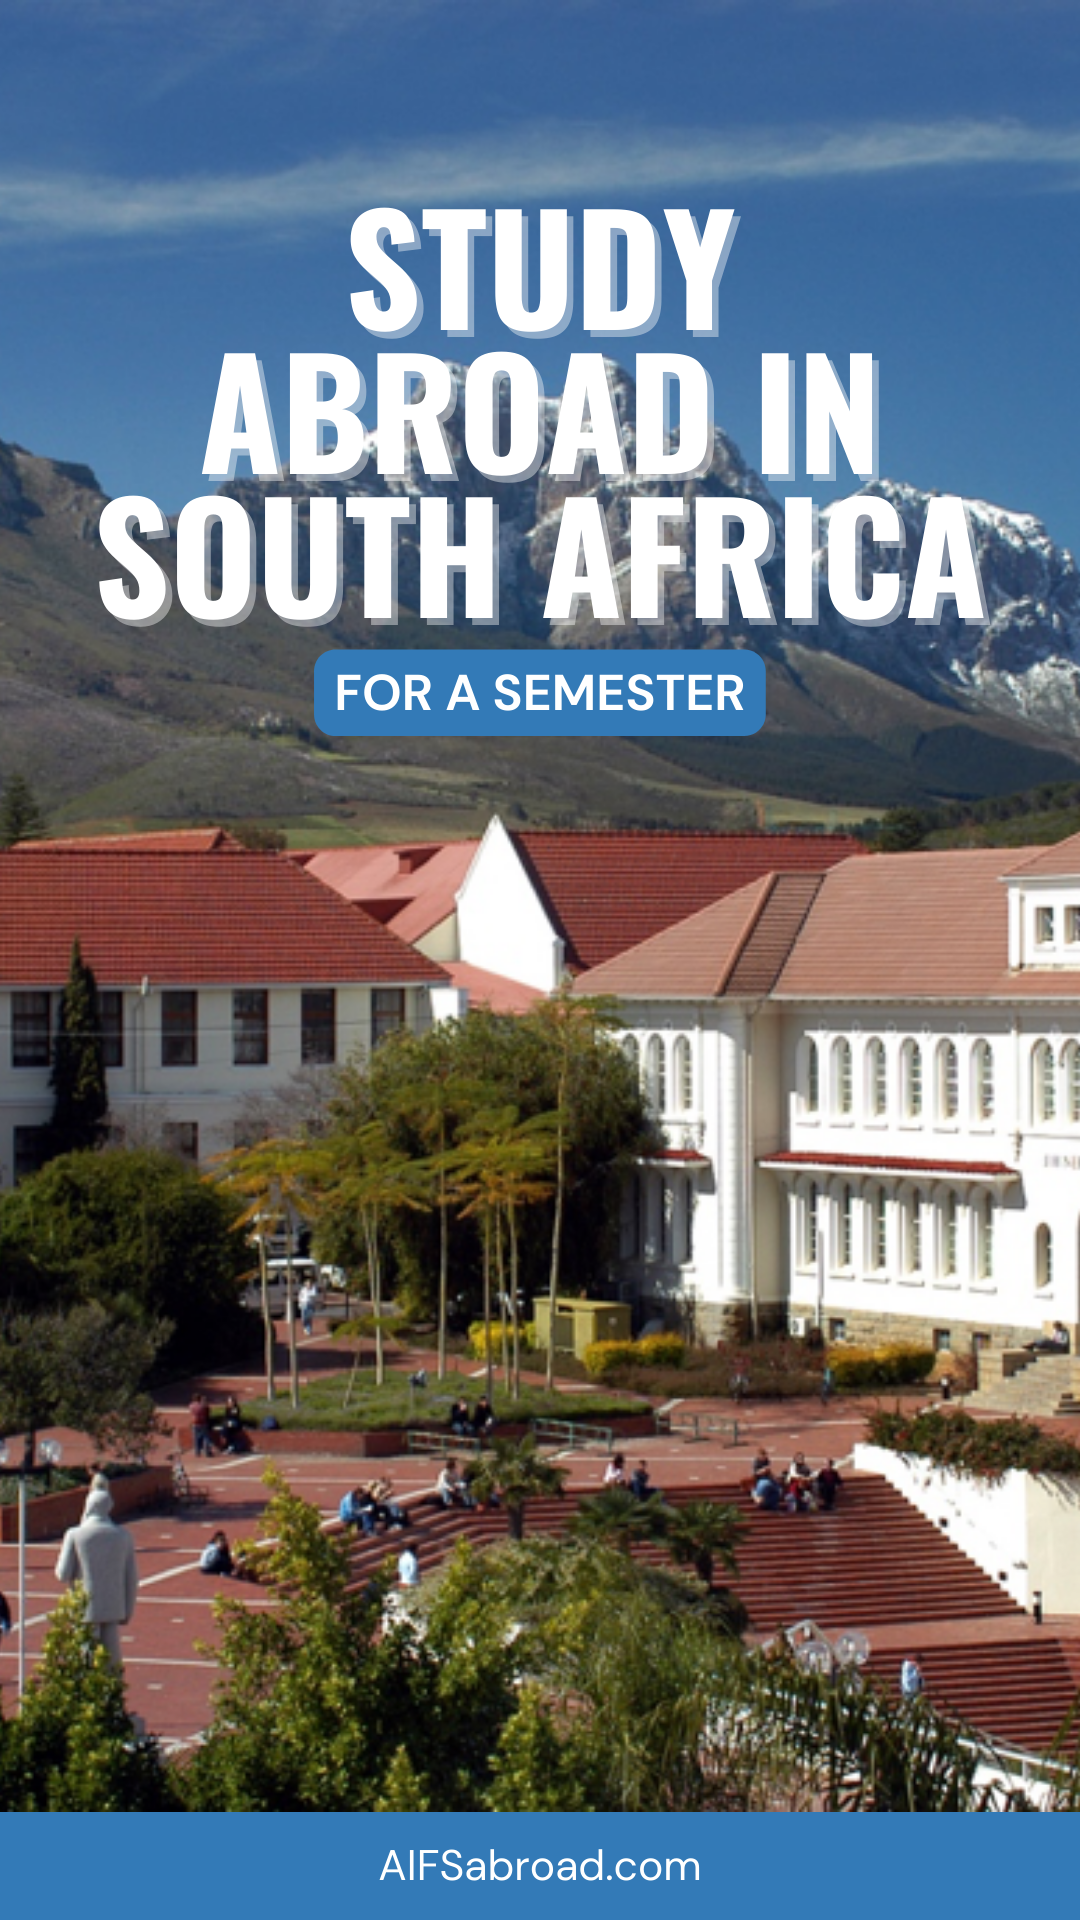 Semester Program Spotlight: Study Abroad in Stellenbosch, South Africa with AIFS Abroad